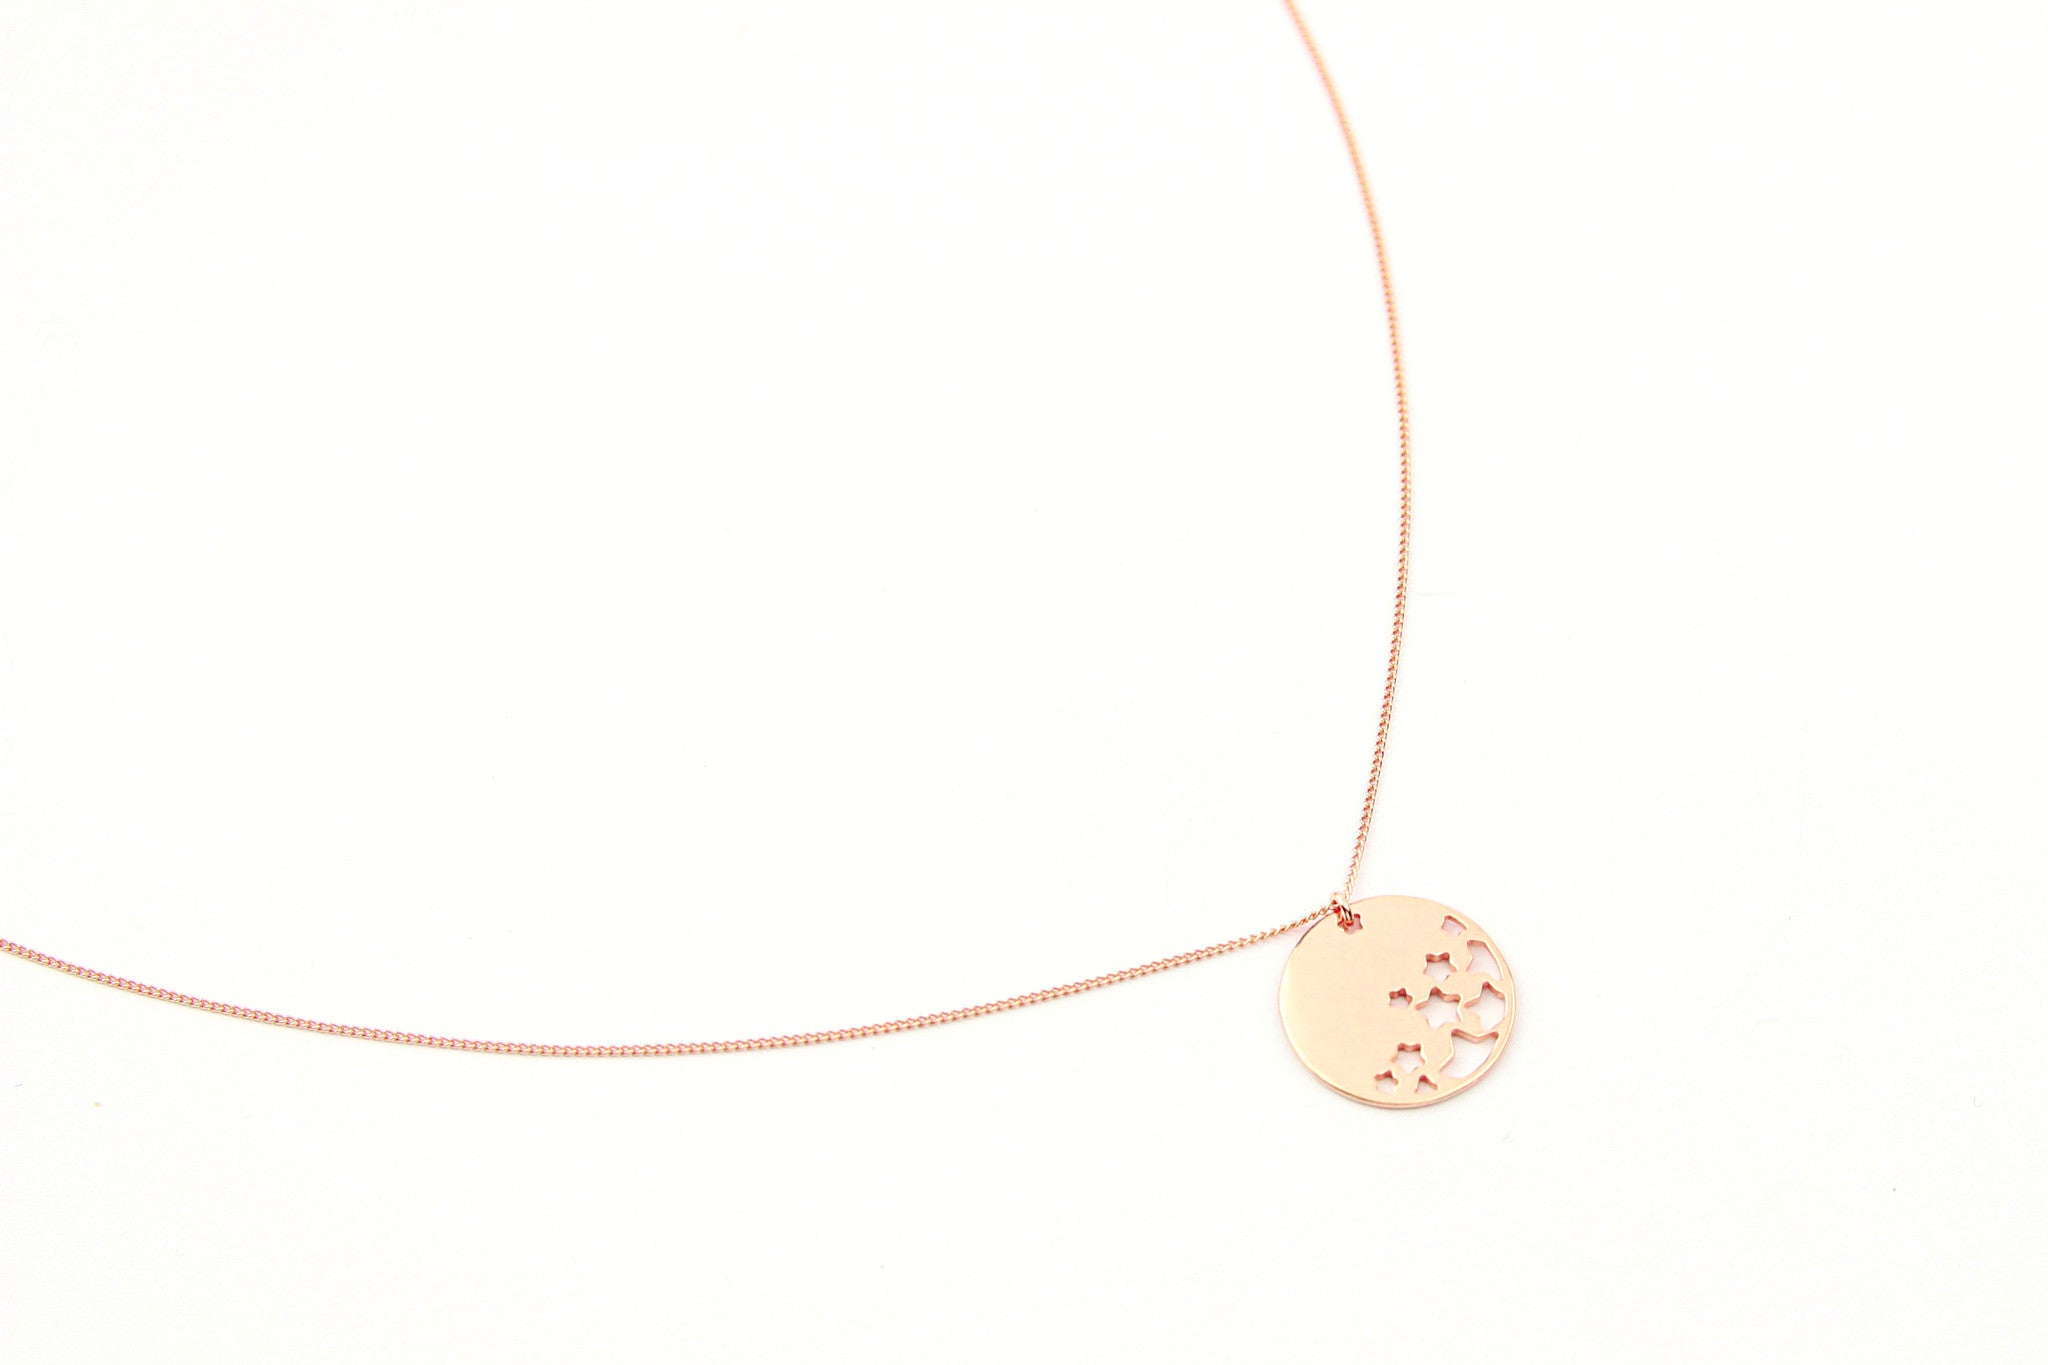 jewelberry necklace kette night sky curb chain rose gold plated sterling silver fine jewelry handmade with love fairtrade